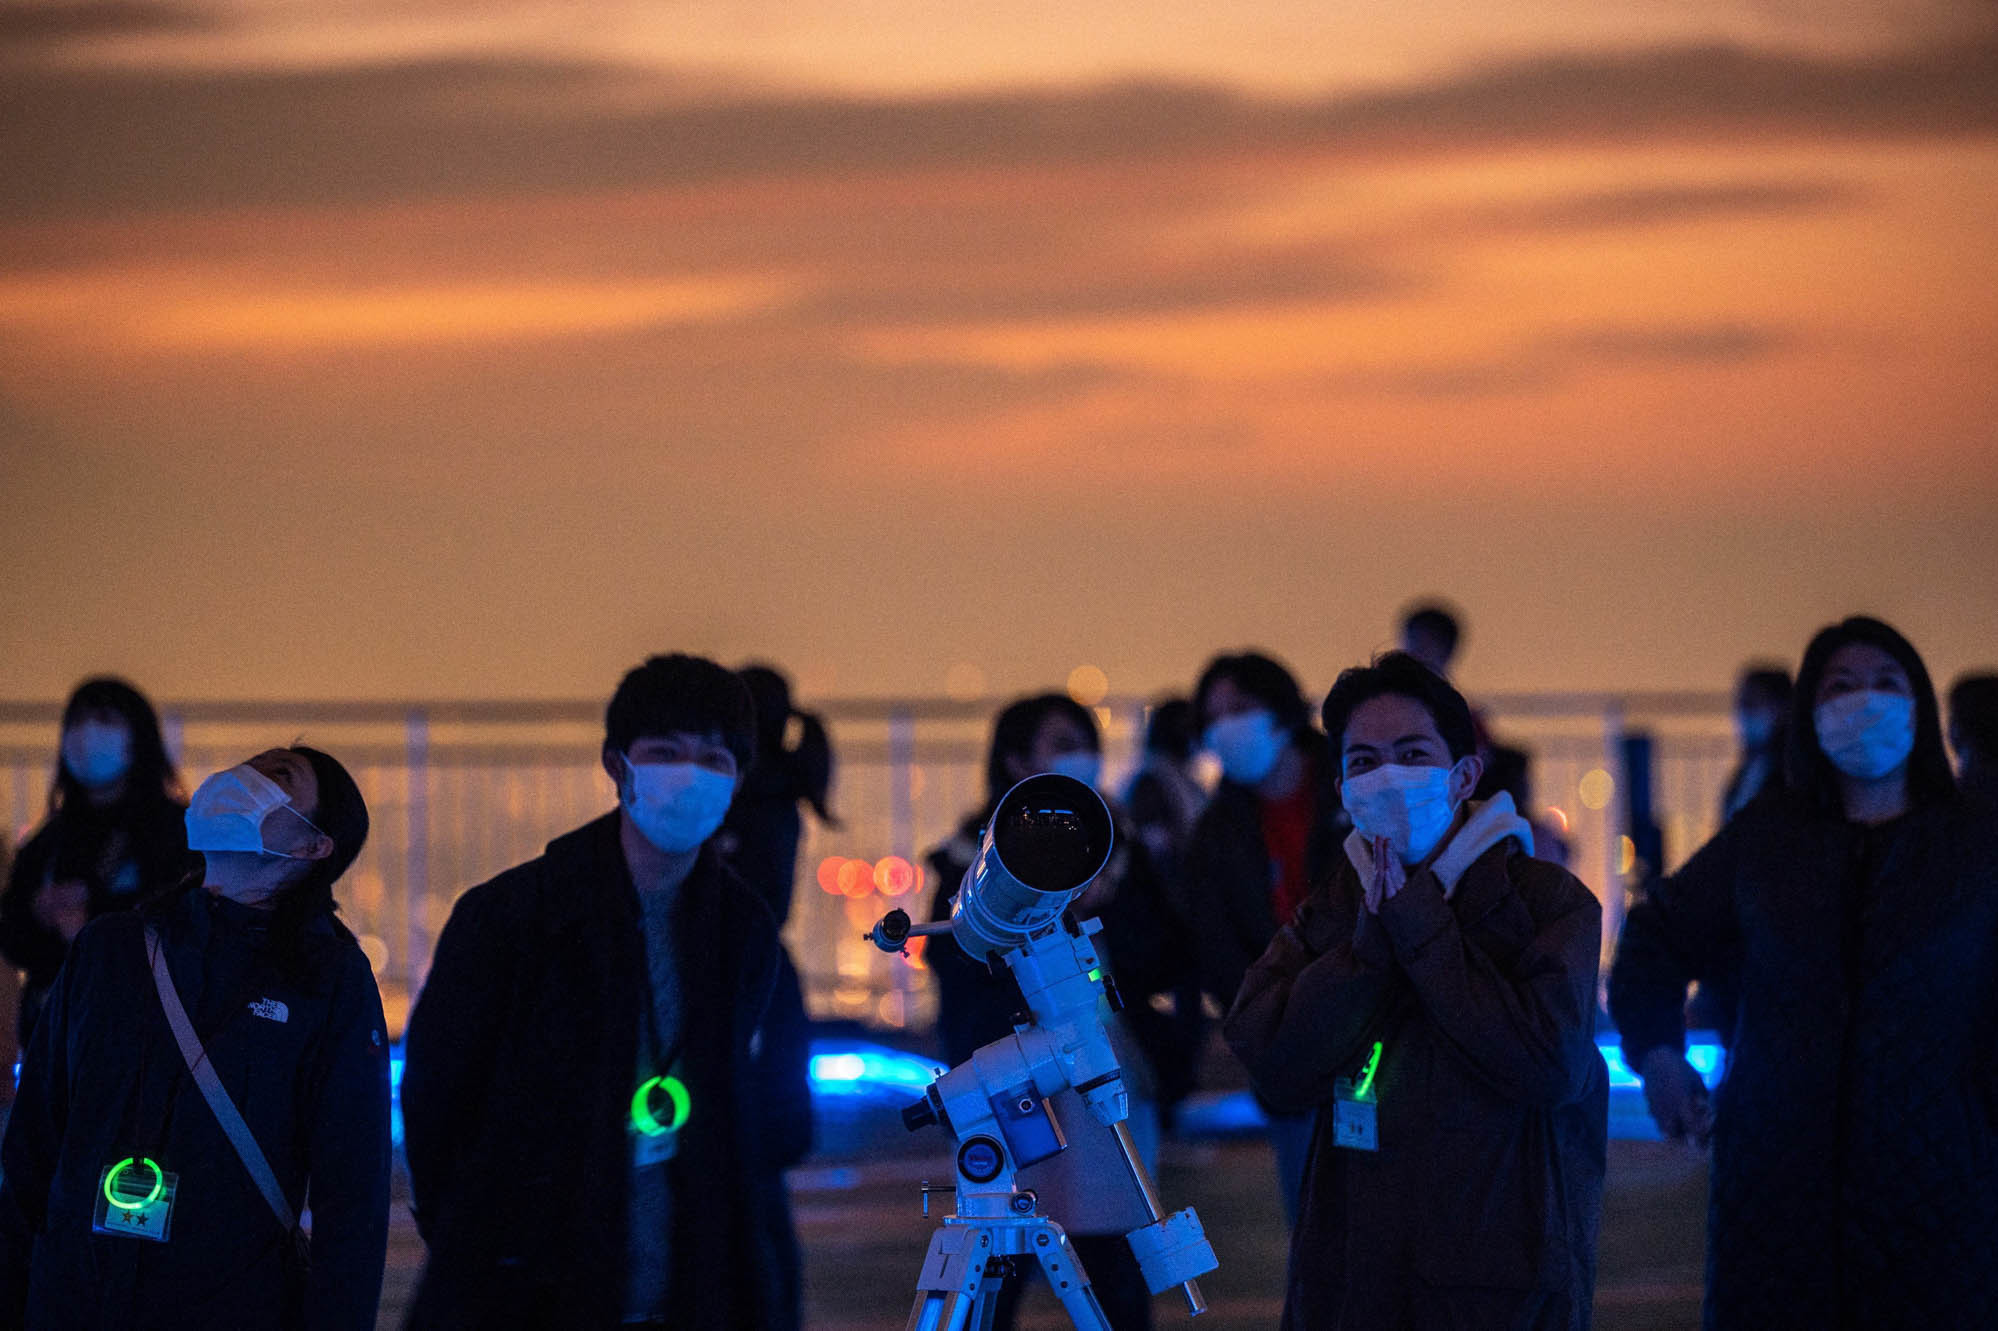 A group of people in masks at dusk outside.